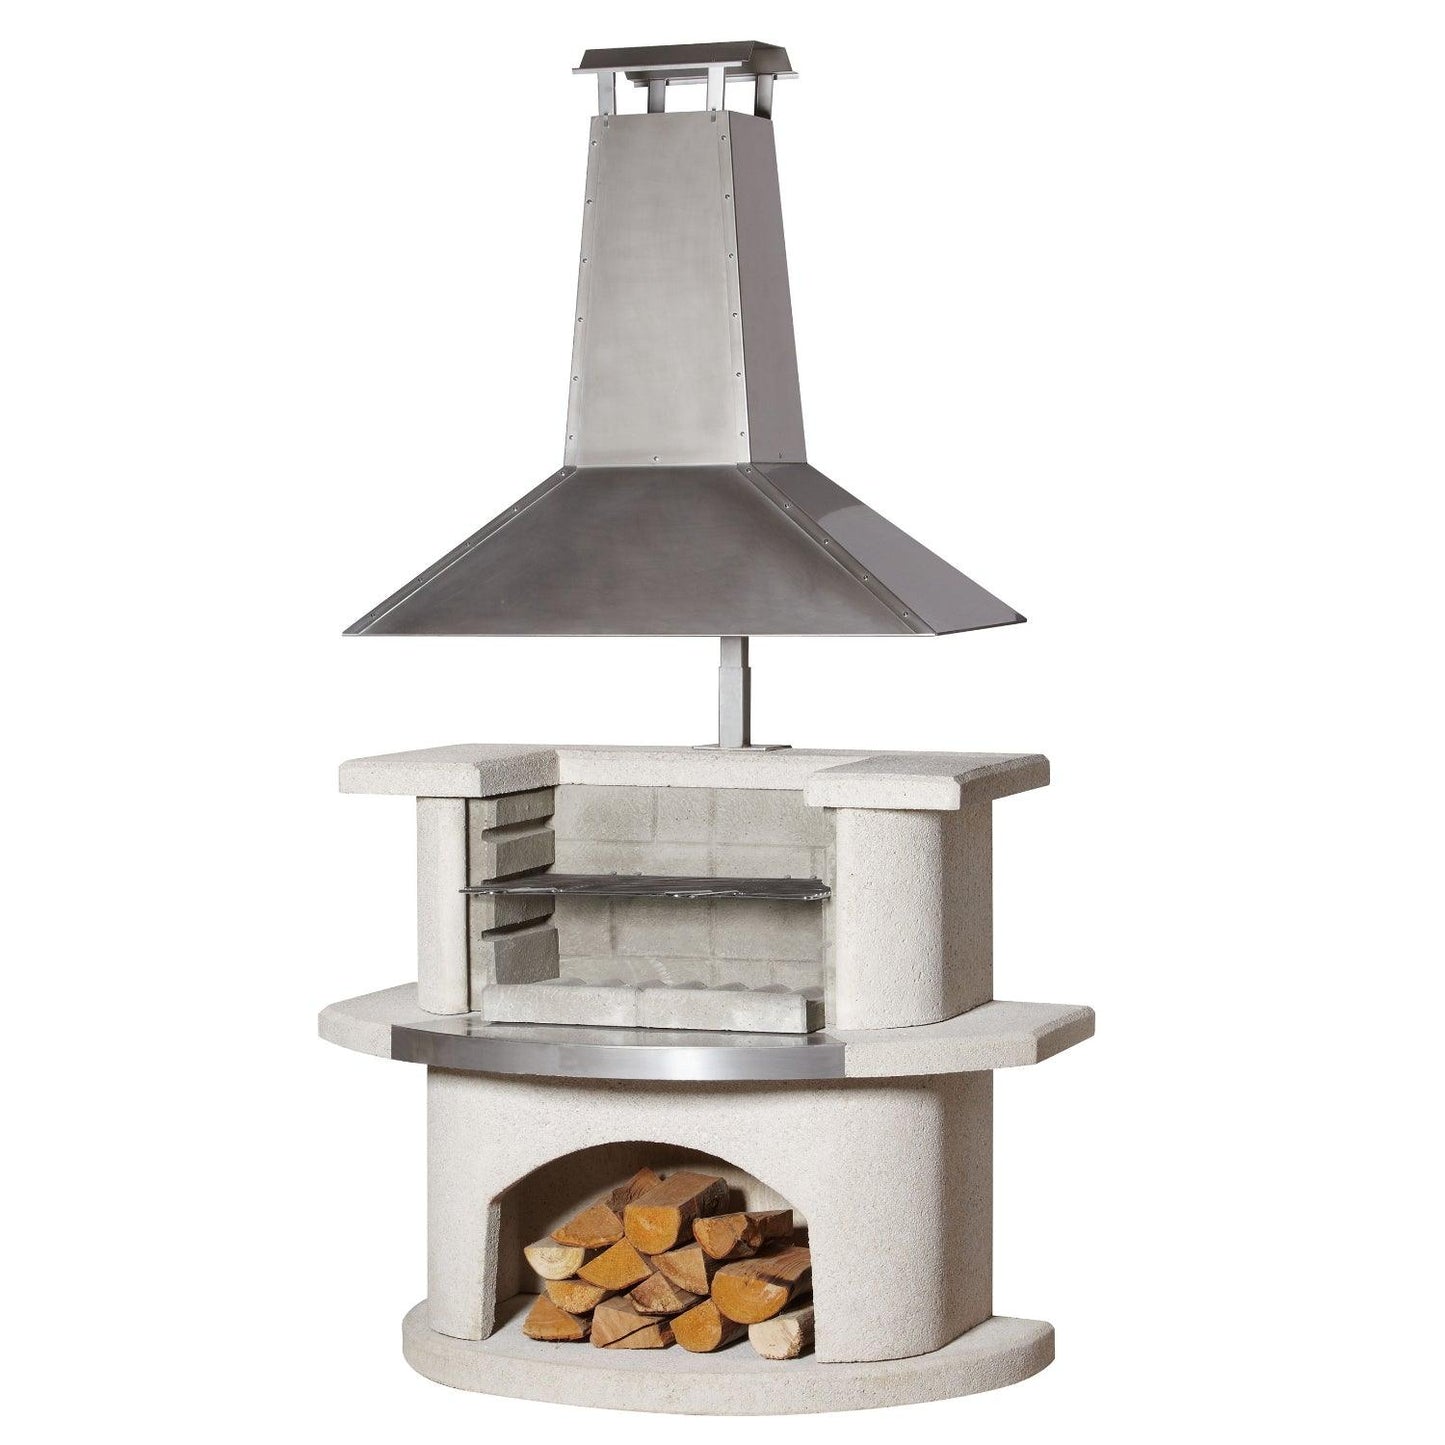 Buschbeck Venedig Masonry Barbecue with Stainless Steel Hood - BBQ Land